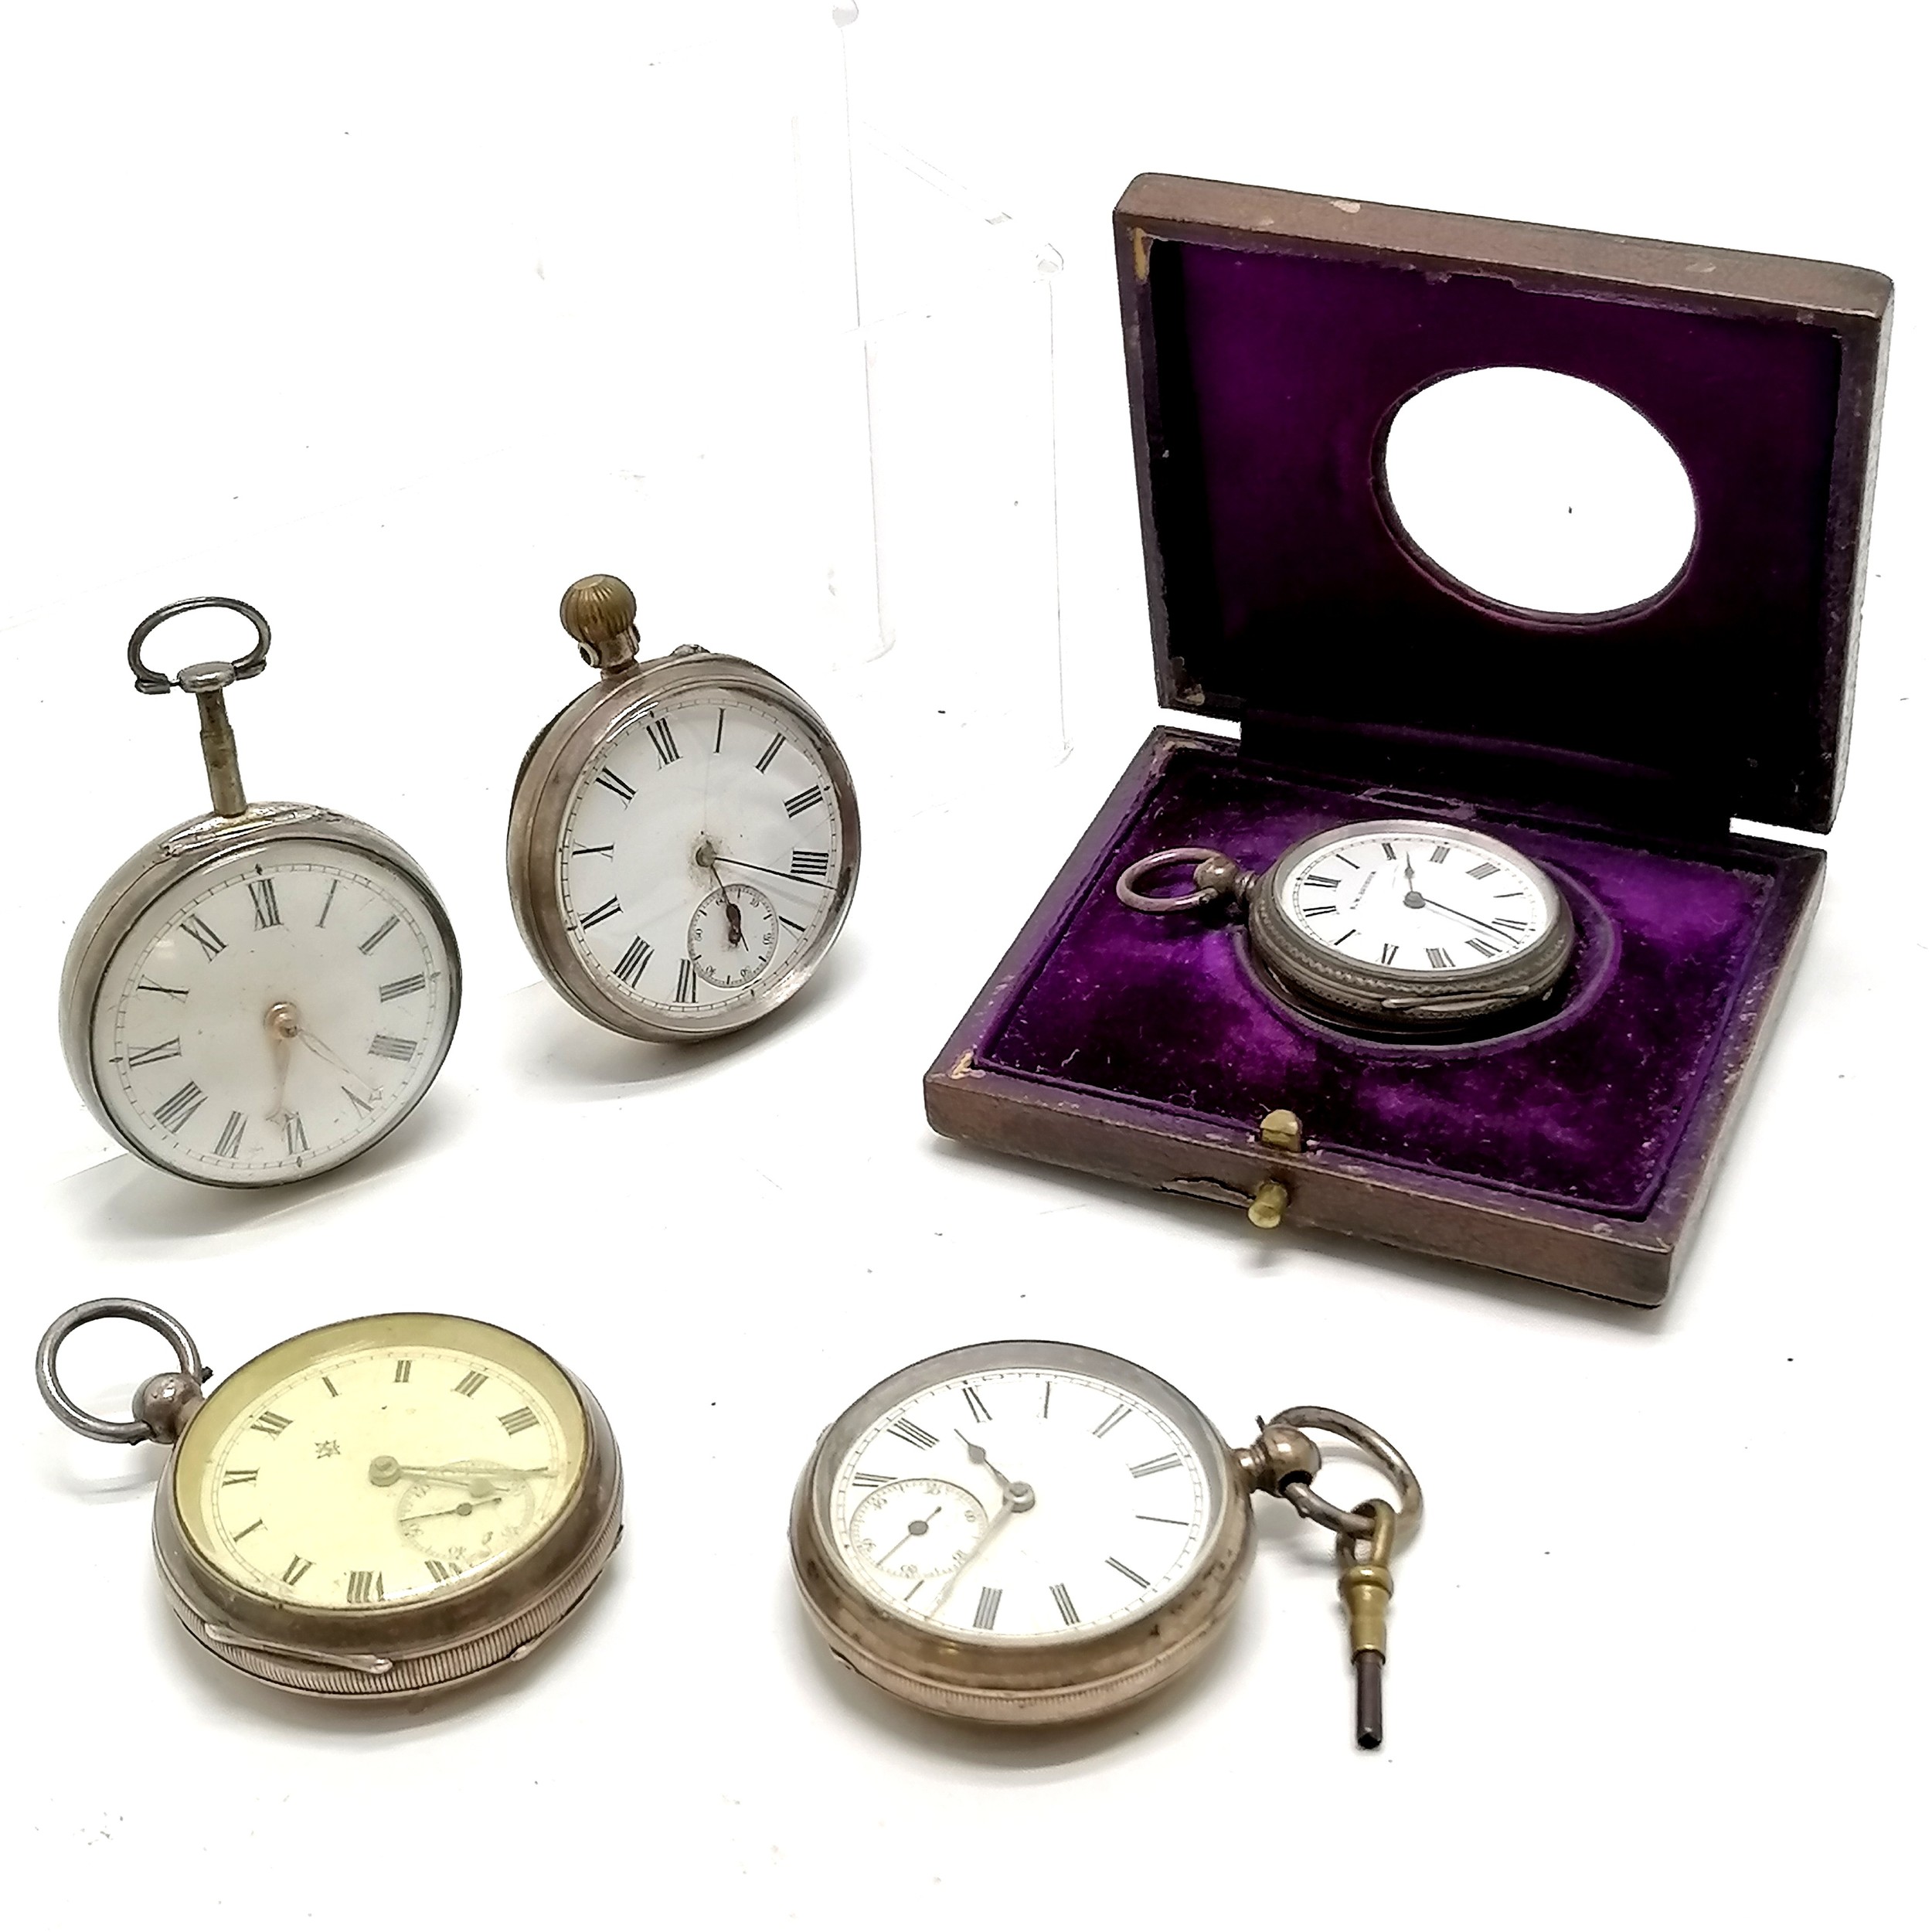 5 x antique silver cased pocket watches (J W Benson (runs) in original fitted display box) ~ for